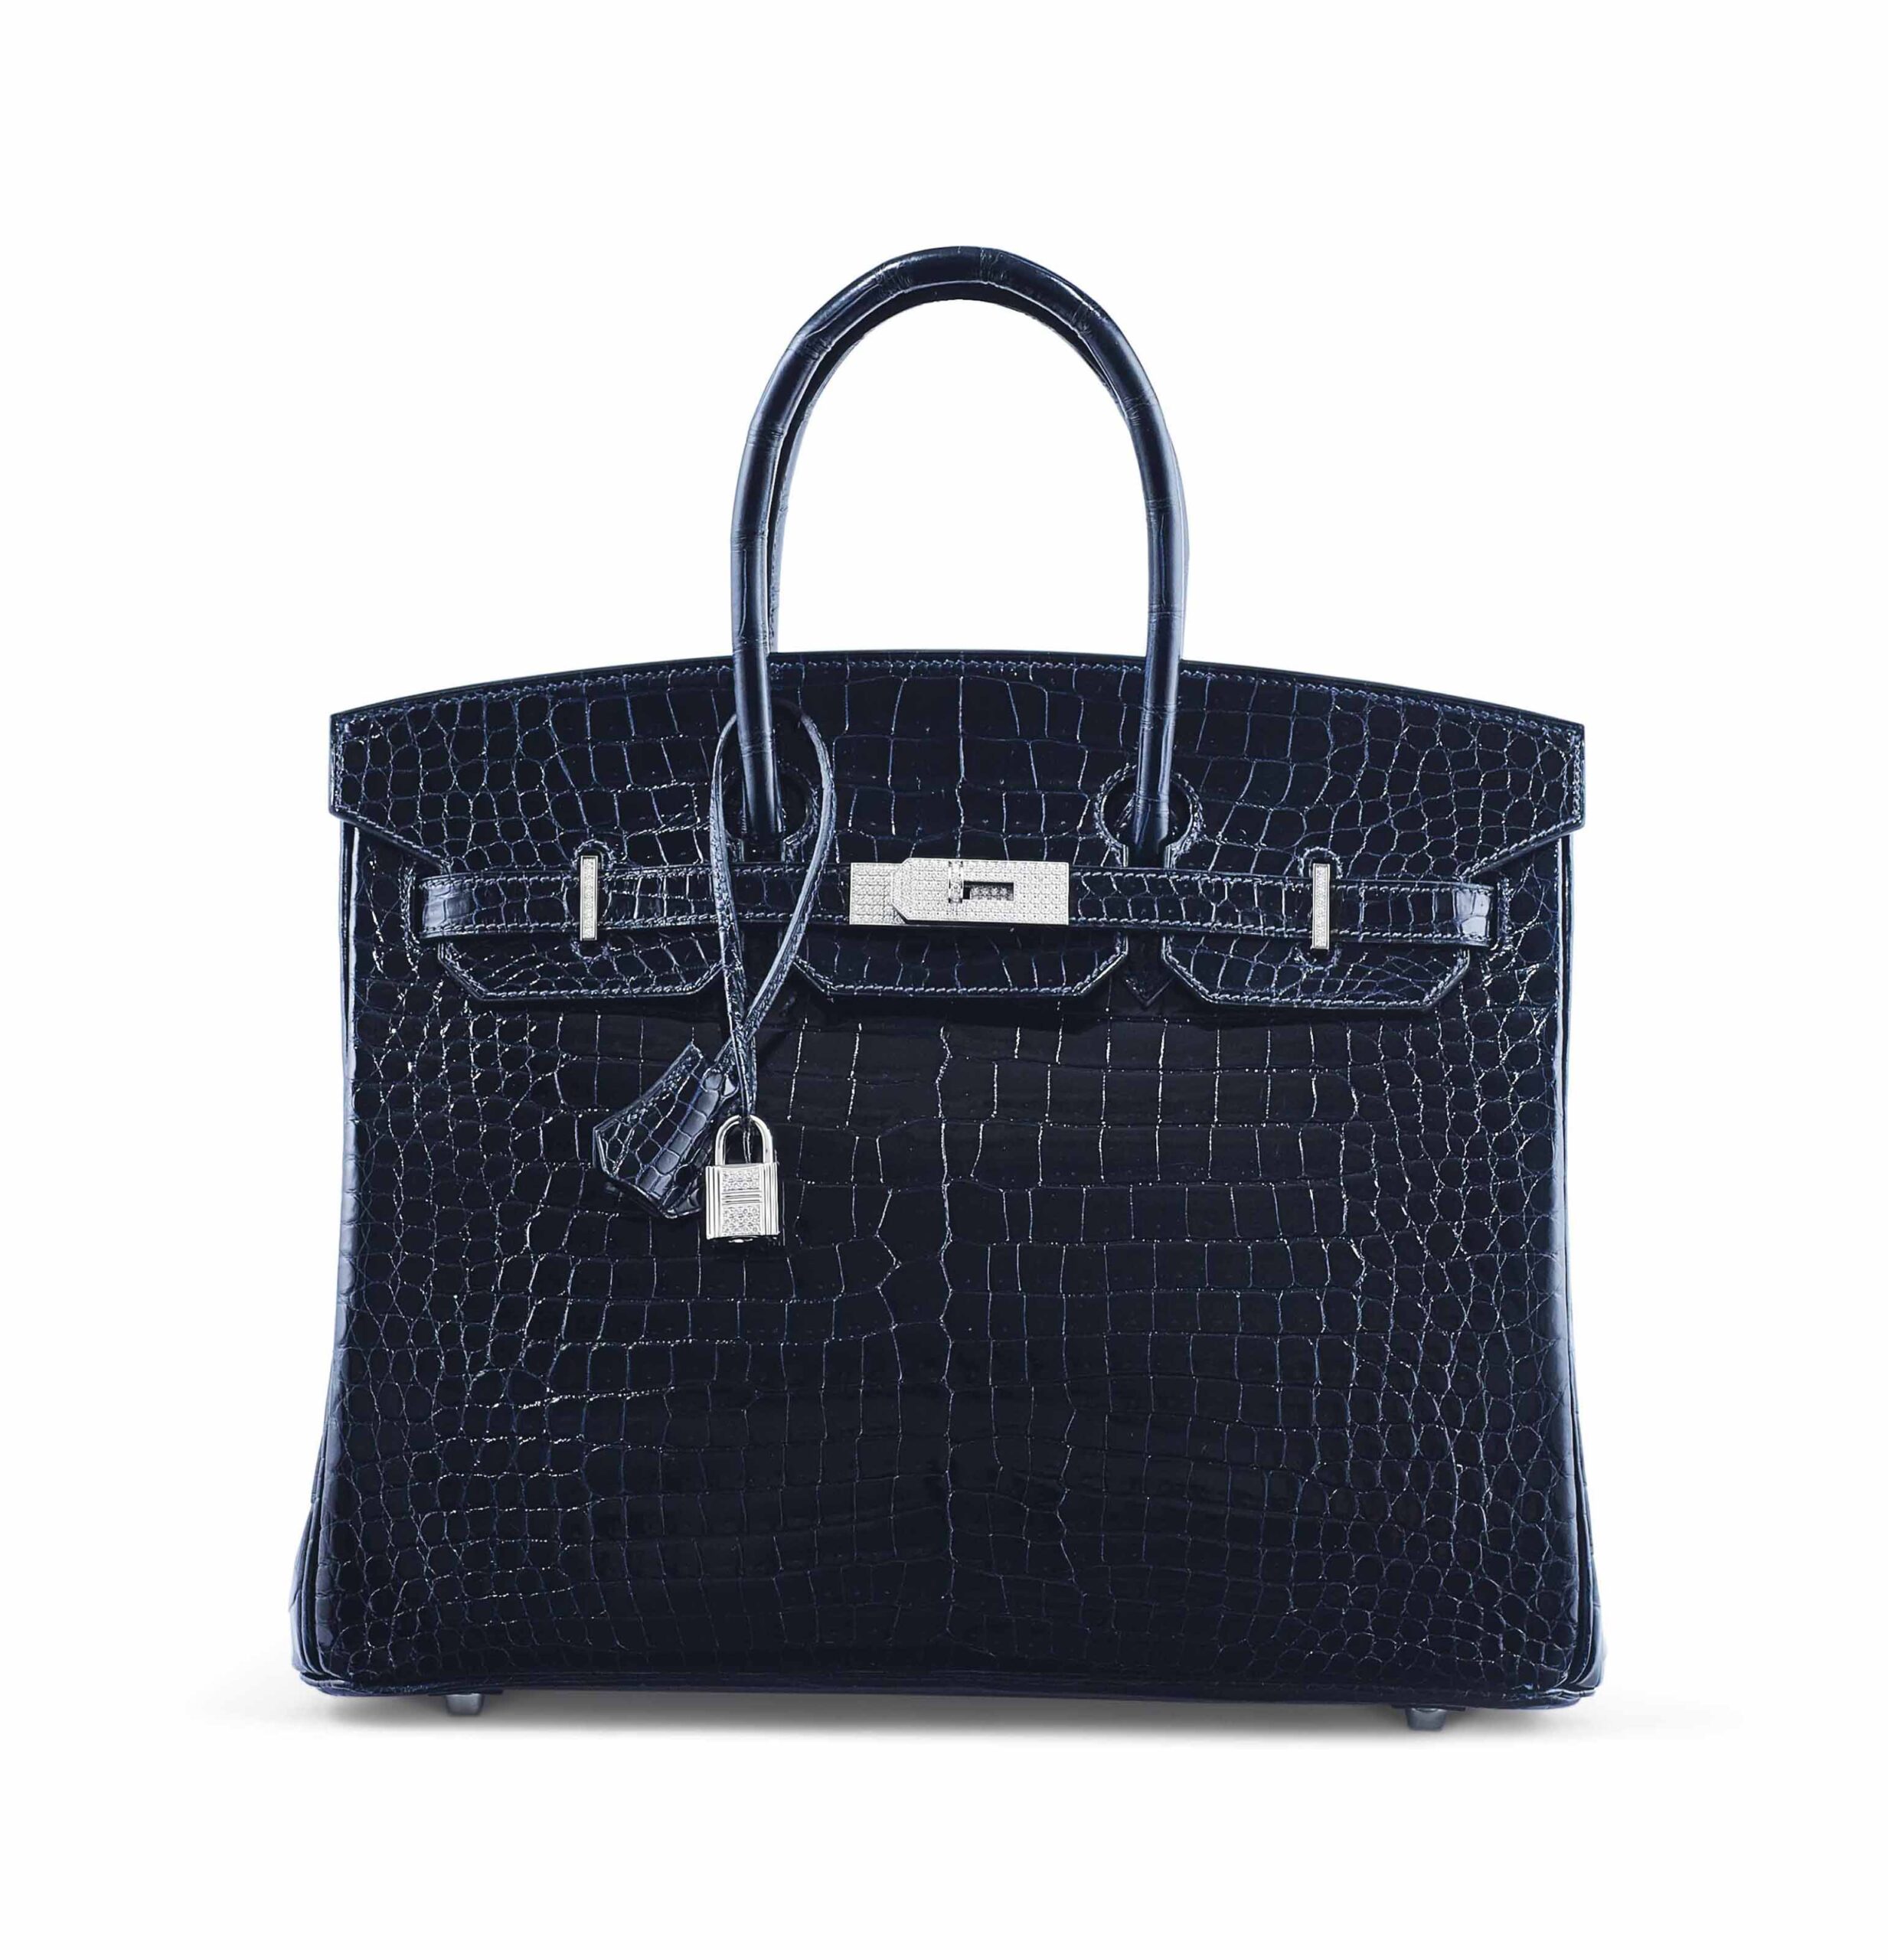 The most expensive Birkin bag by Hermès in the world